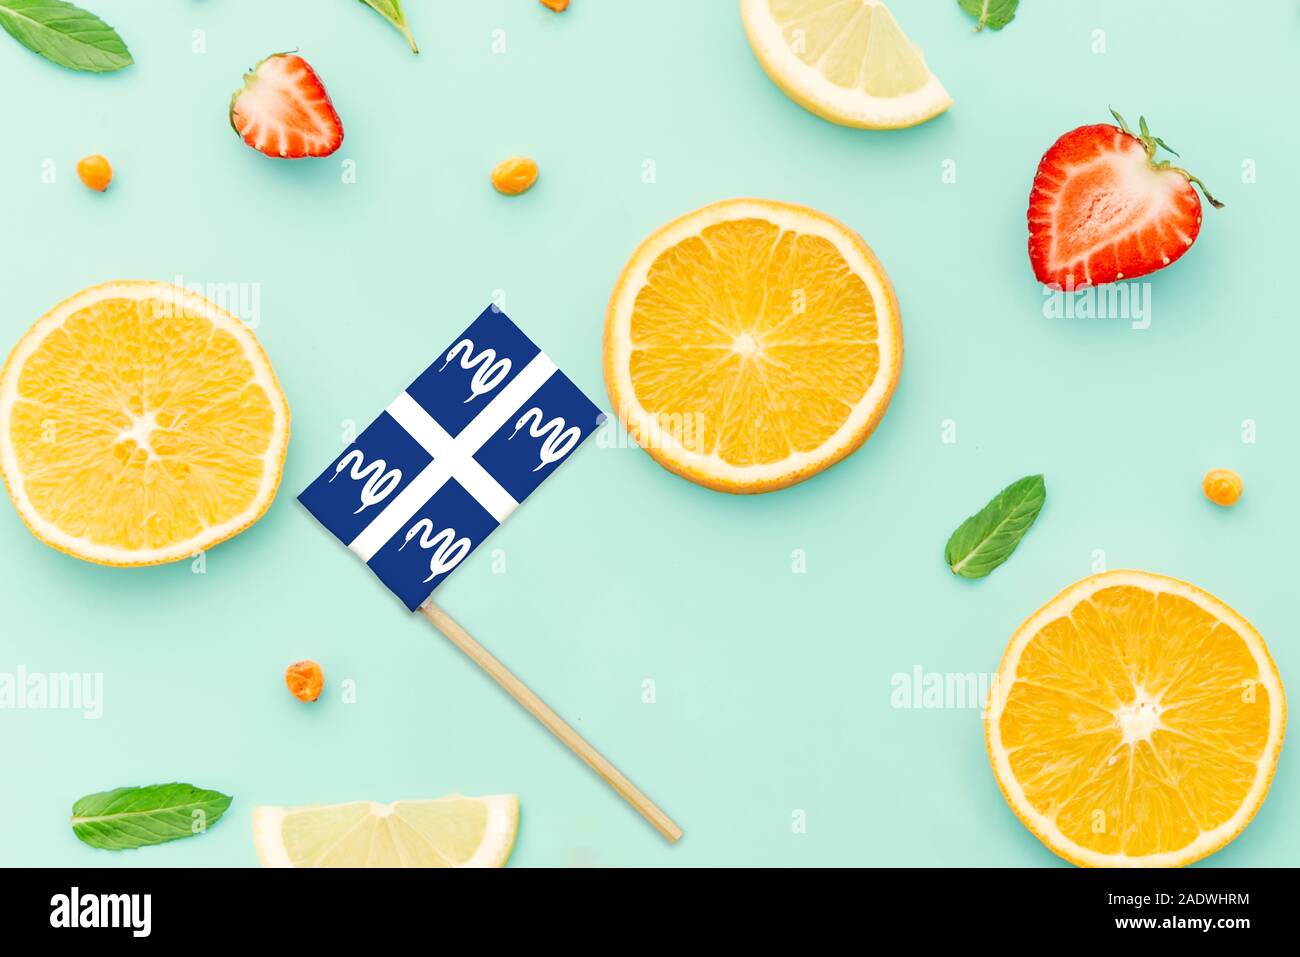 Martinique Paper Stick Flag. National summer fruits concept, local food market. Vegetarian theme. Stock Photo